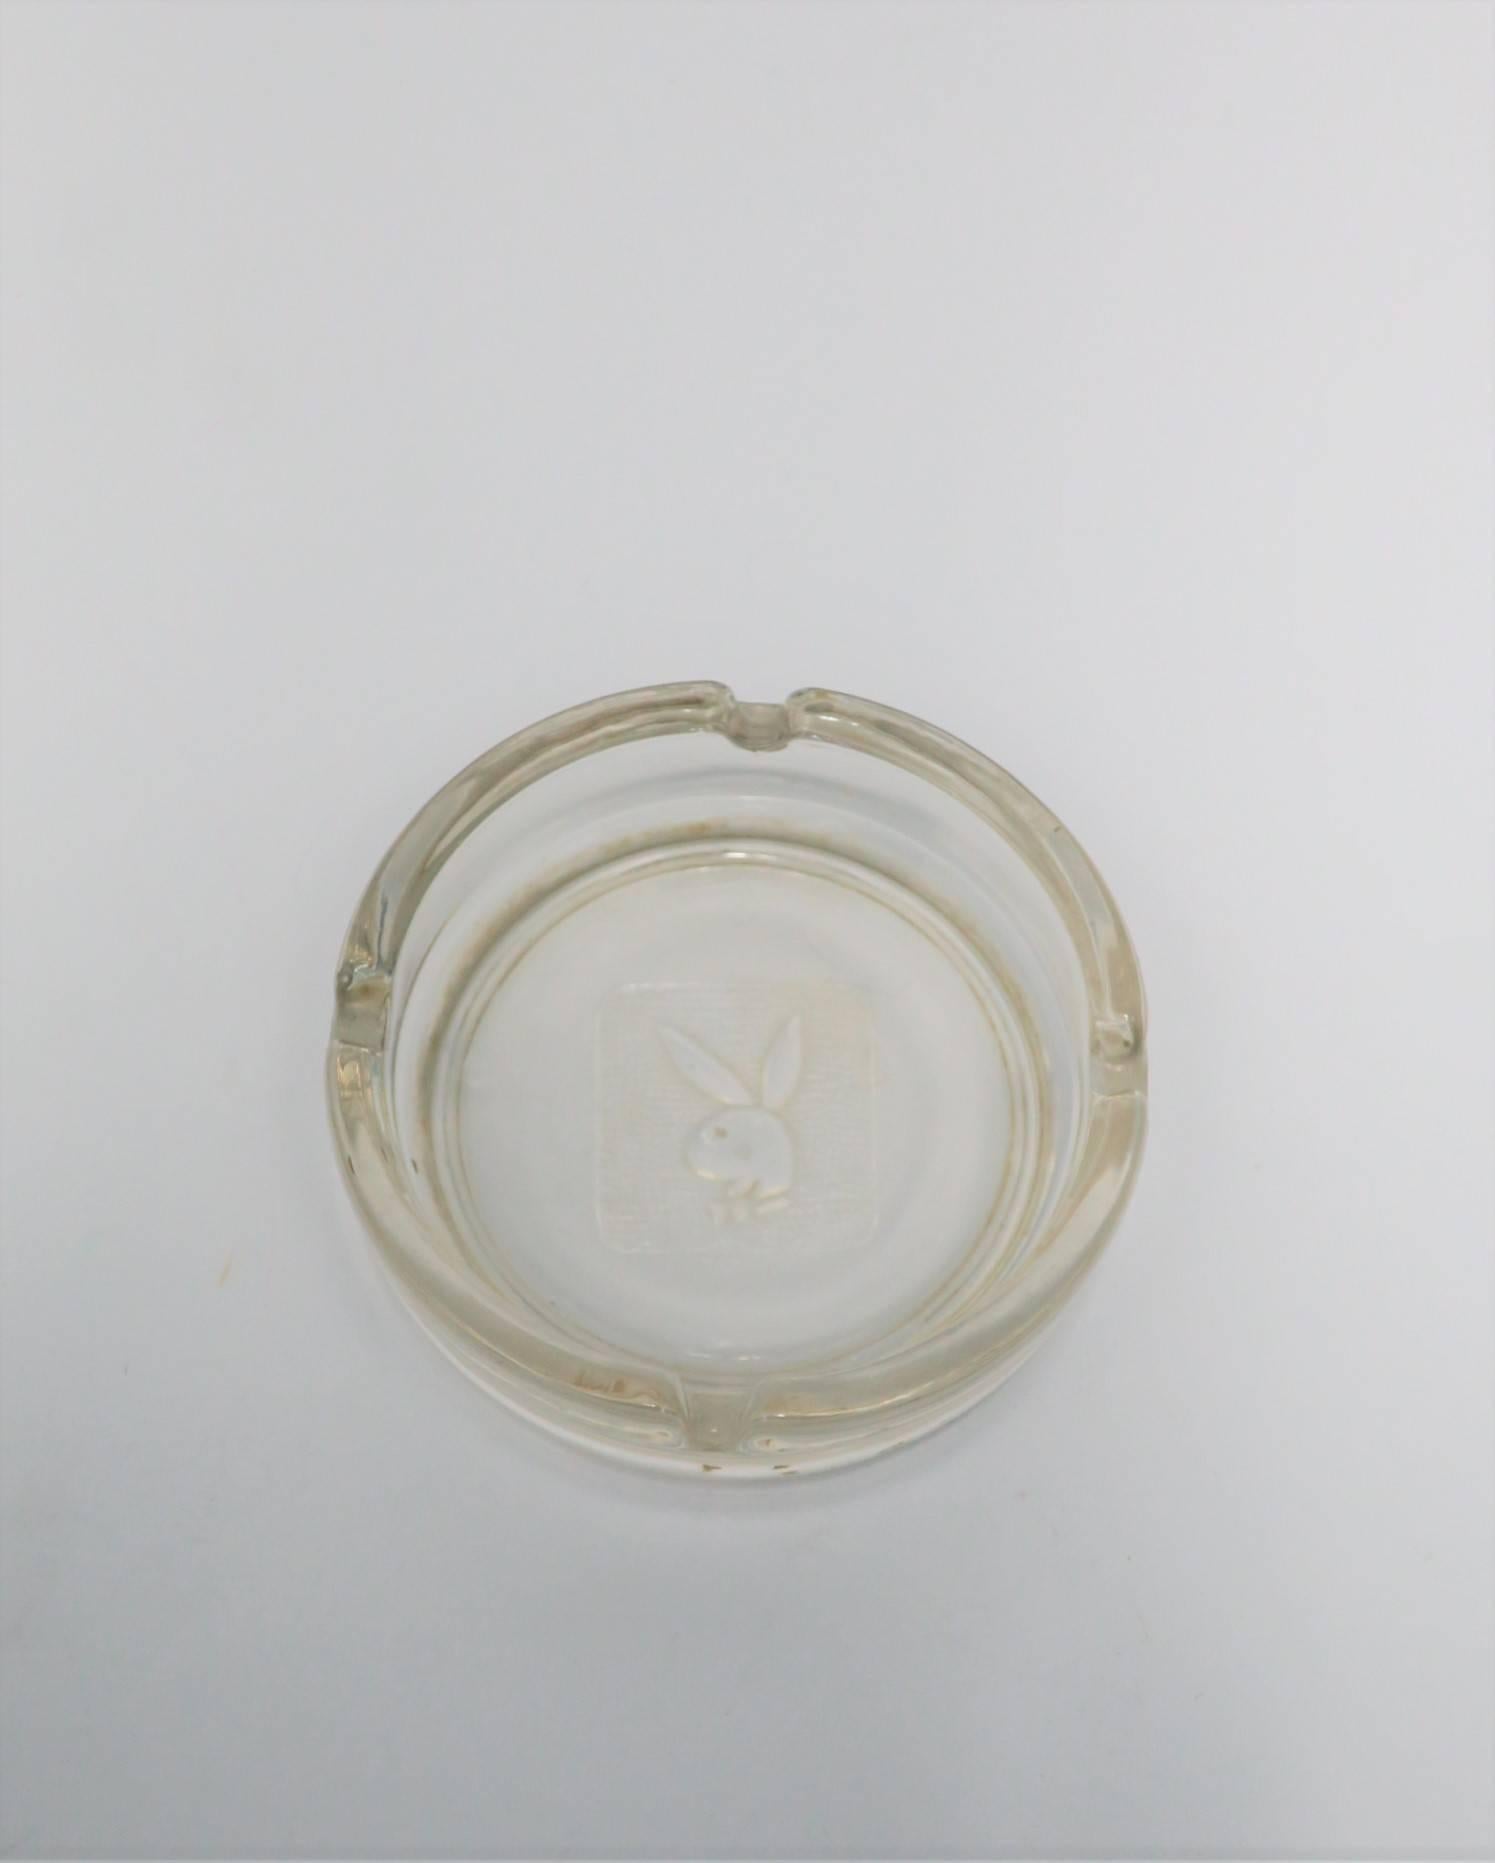 A vintage Playboy glass ashtray, circa 1970s Playboy Club New York. Glass ashtray has embossed iconic 'Playboy' bunny. Four indents around rim. In addition to it's function as an ashtray, piece can also be used as a standalone decorative object,